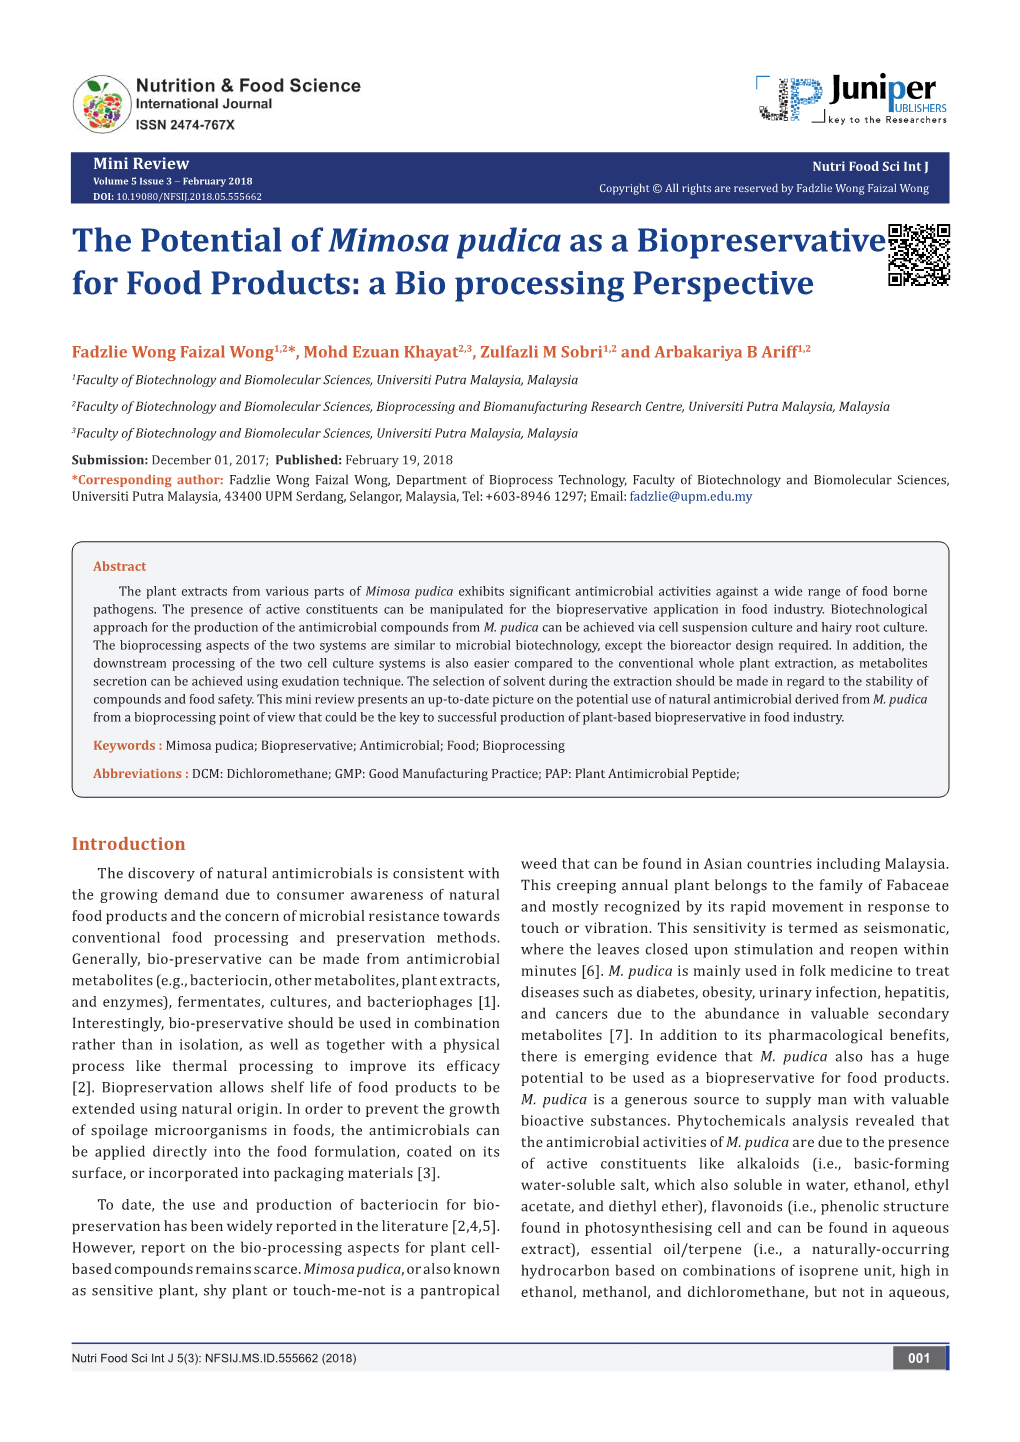 The Potential of Mimosa Pudica As a Biopreservative for Food Products: a Bio Processing Perspective